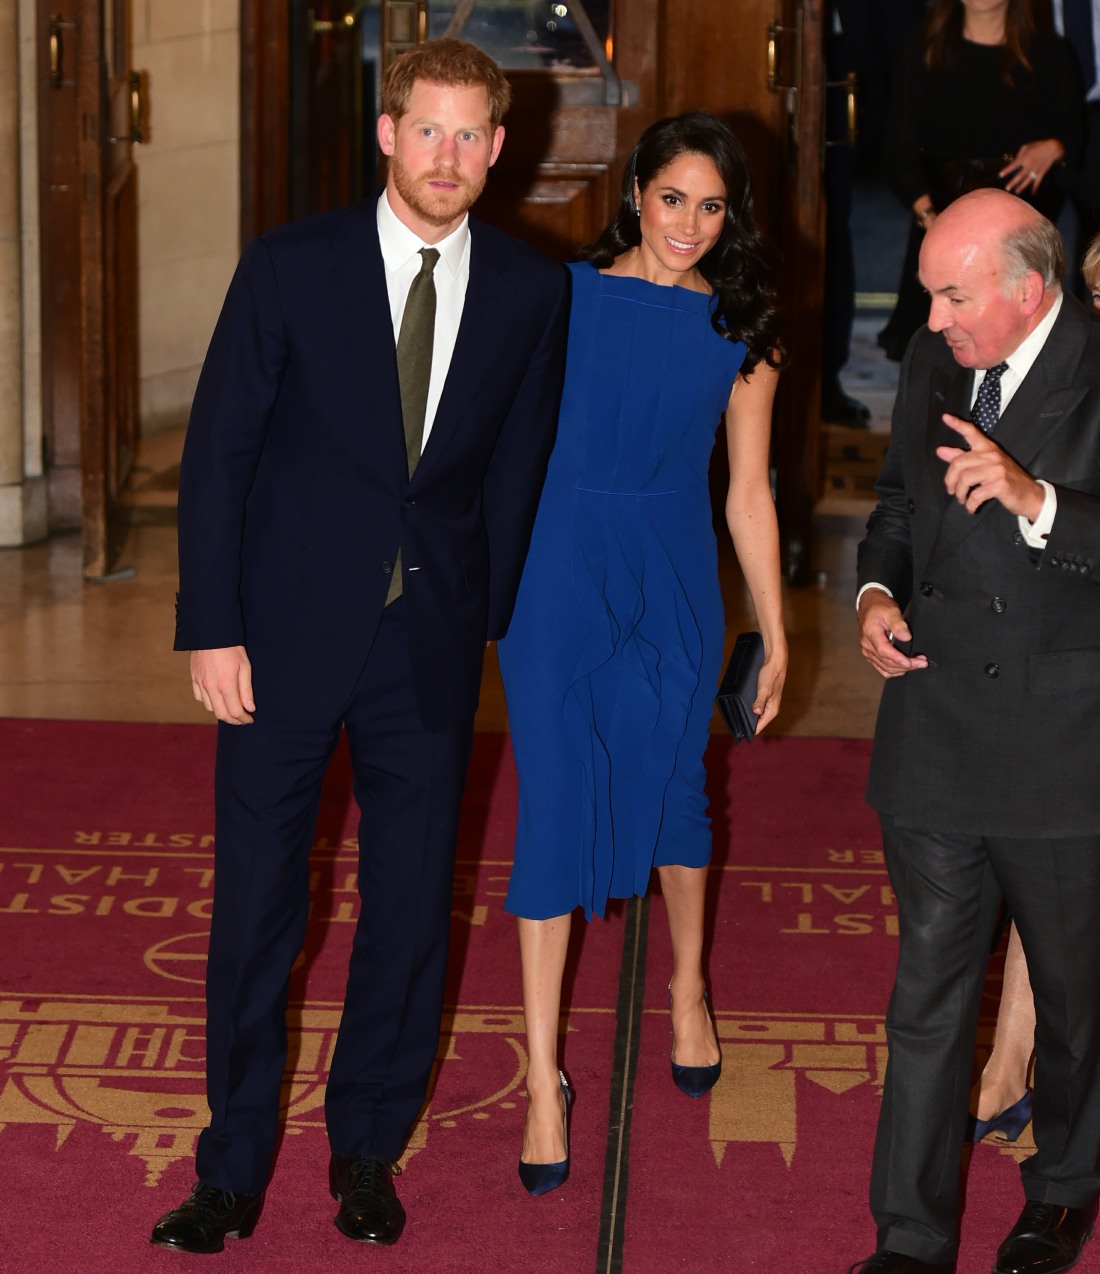 The Duke and Duchess of Sussex meet guests during the interval of a commemorativ